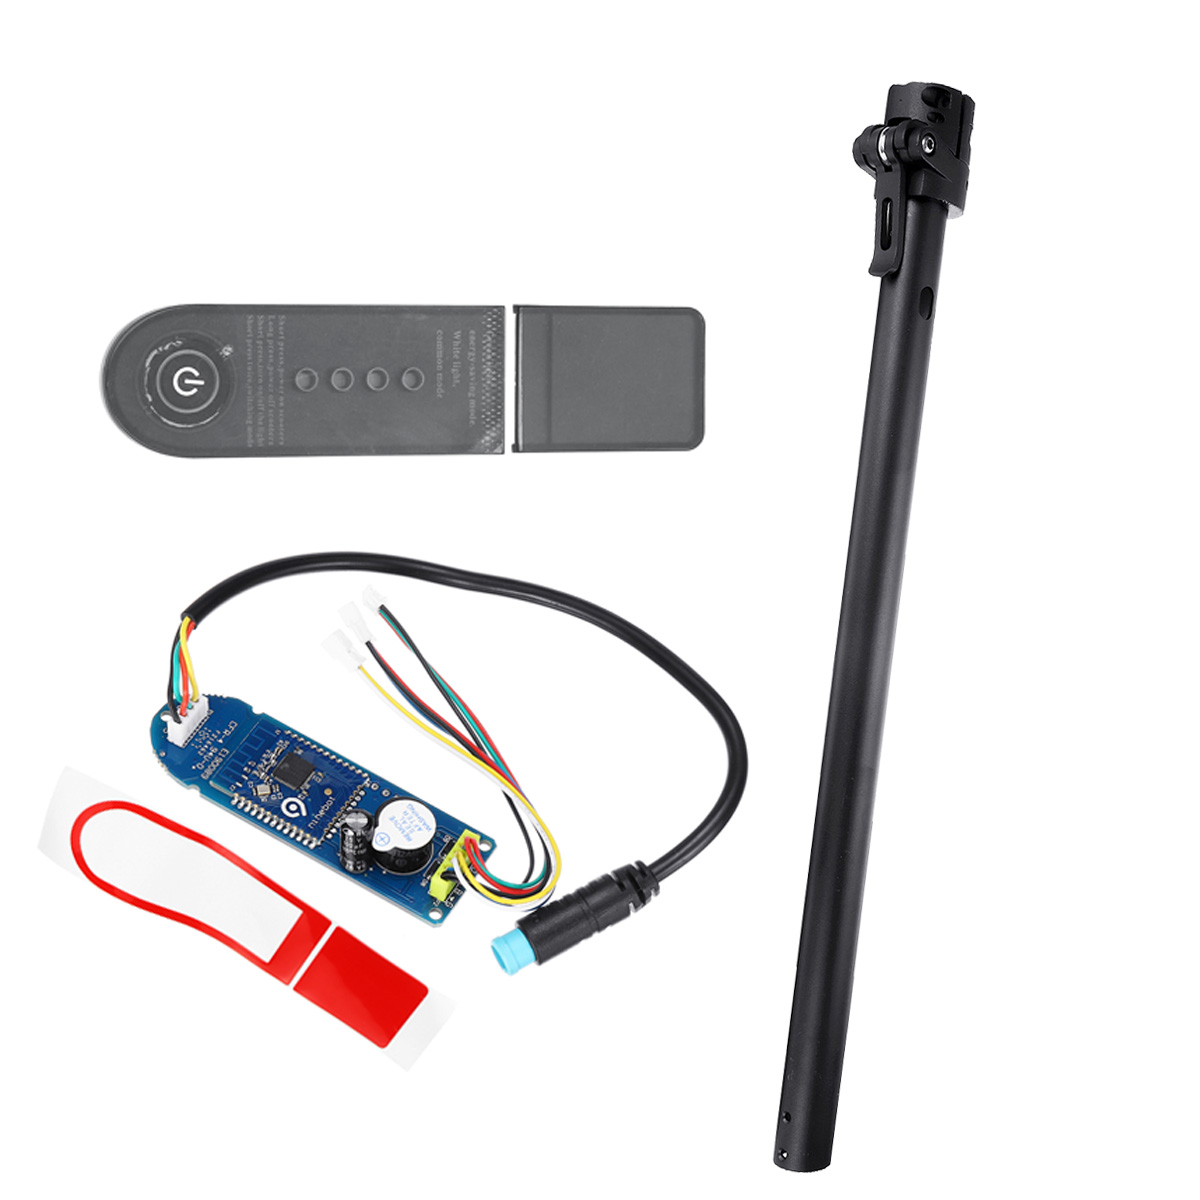 3 in 1 Folding Pole + Circuit Board +Scooter Panel for Xiaomi MIJIA M365 Scooter - Auto GoShop